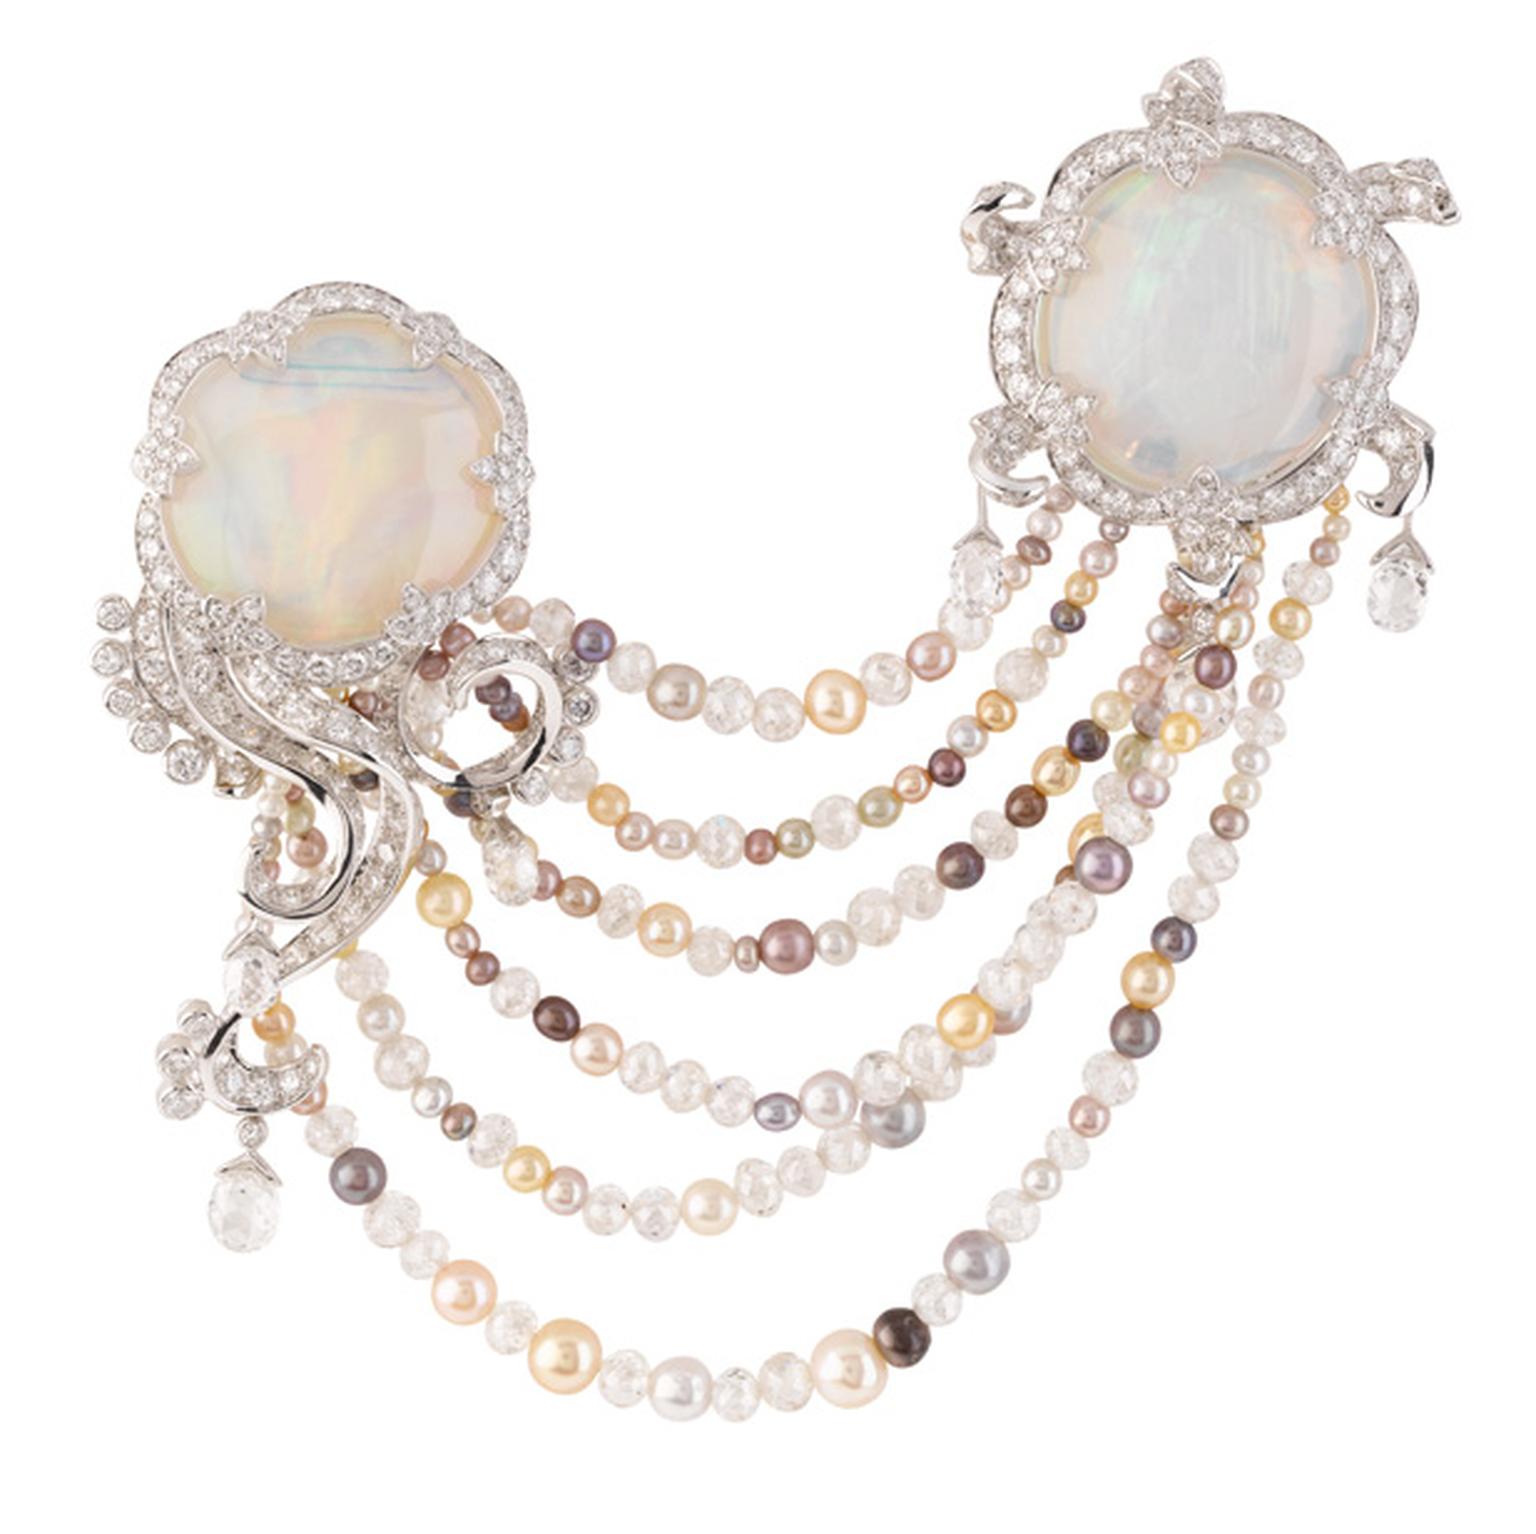 Van Cleef & Arpels Meduse Lune clip with opals and pearls